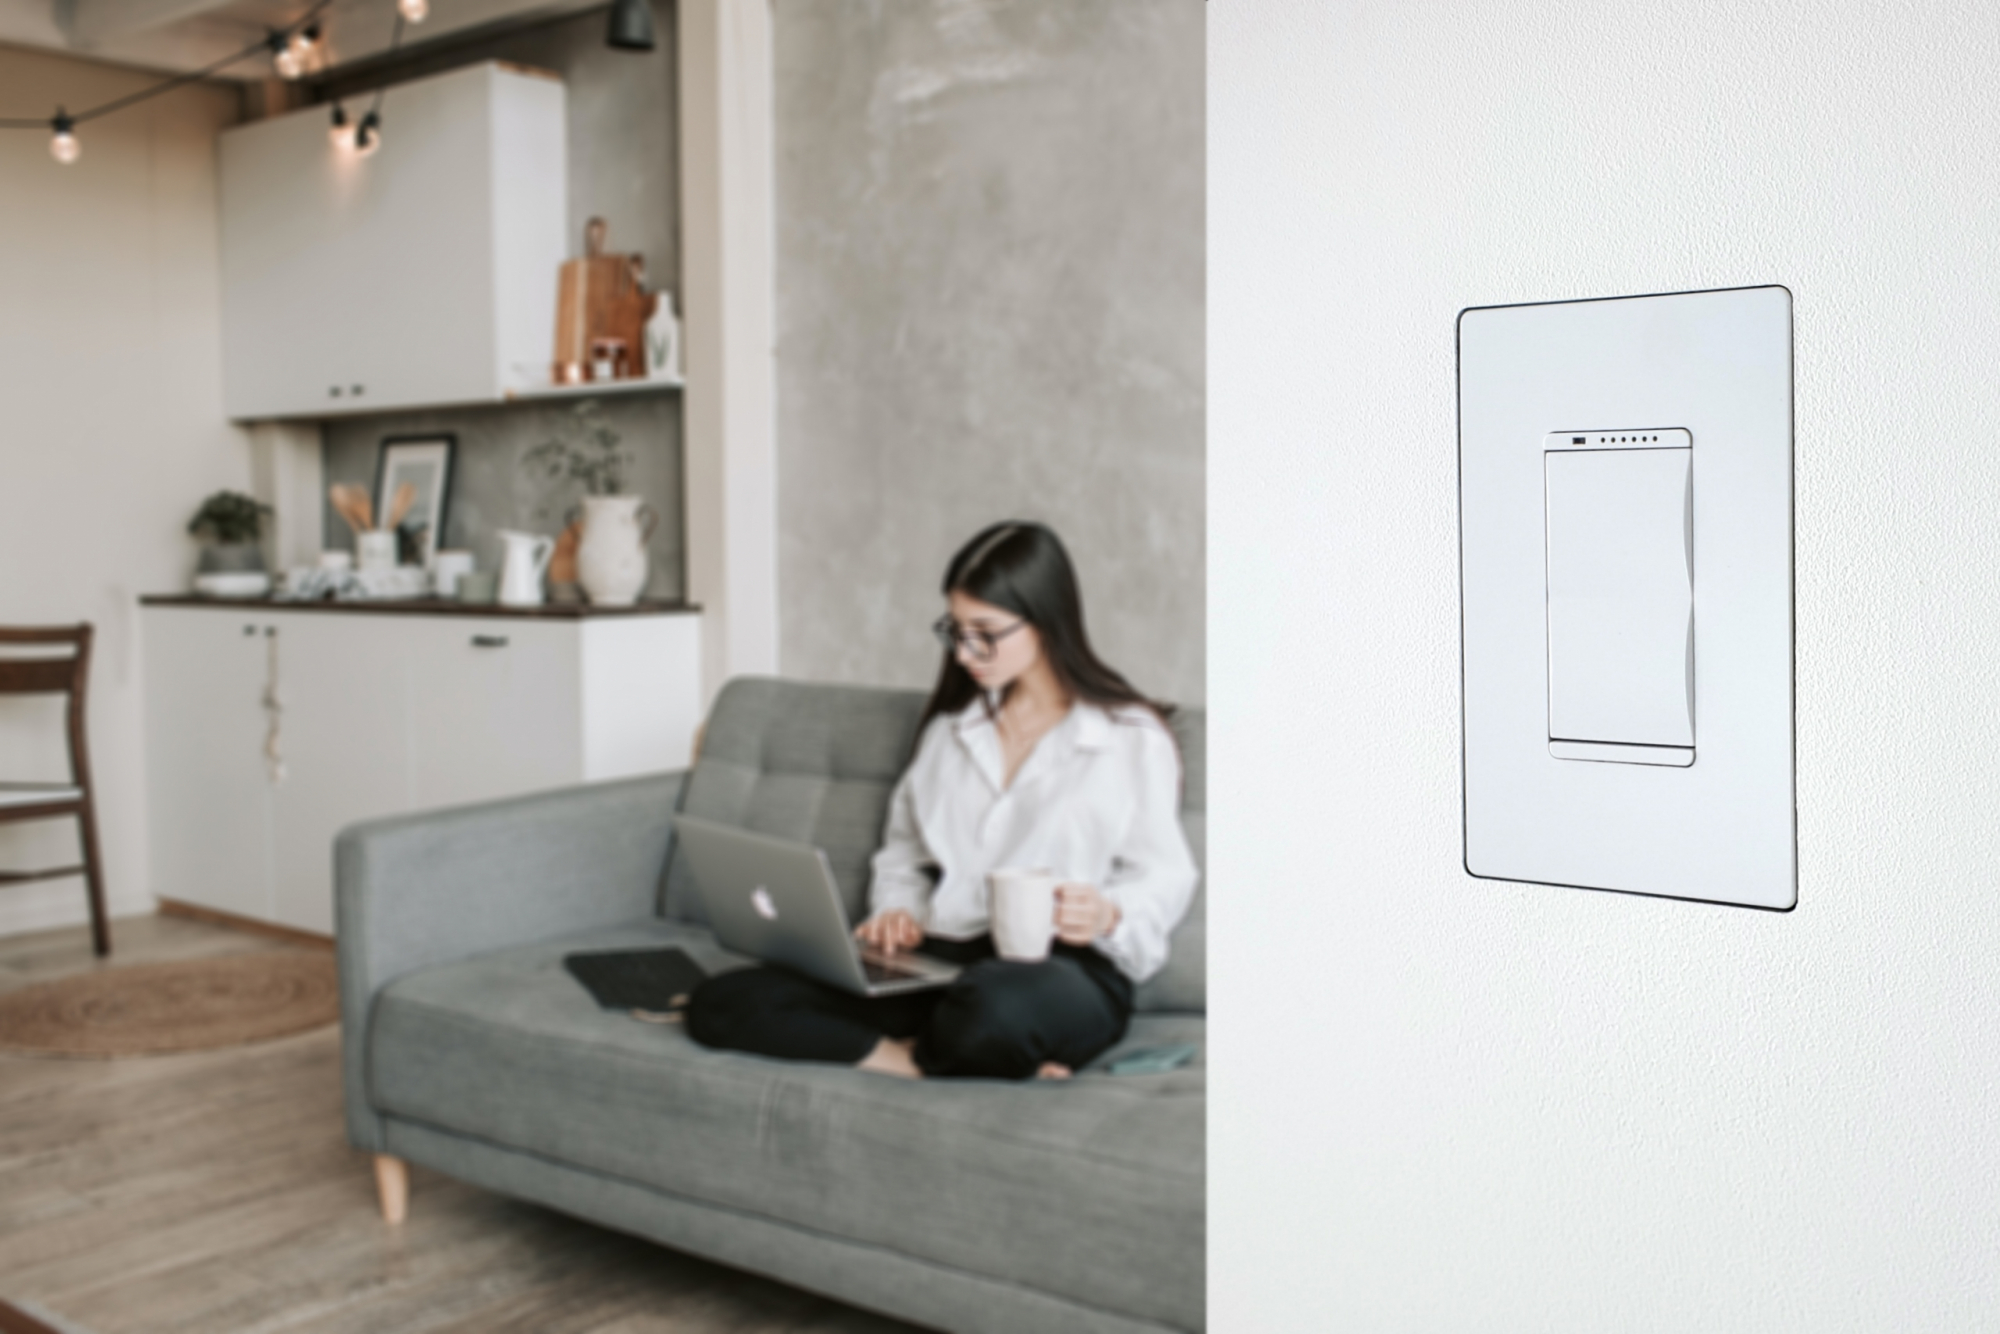 Wall-Smart offers aesthetically pleasing mount designs for everything from touchscreens and switches, like this one from Savant.